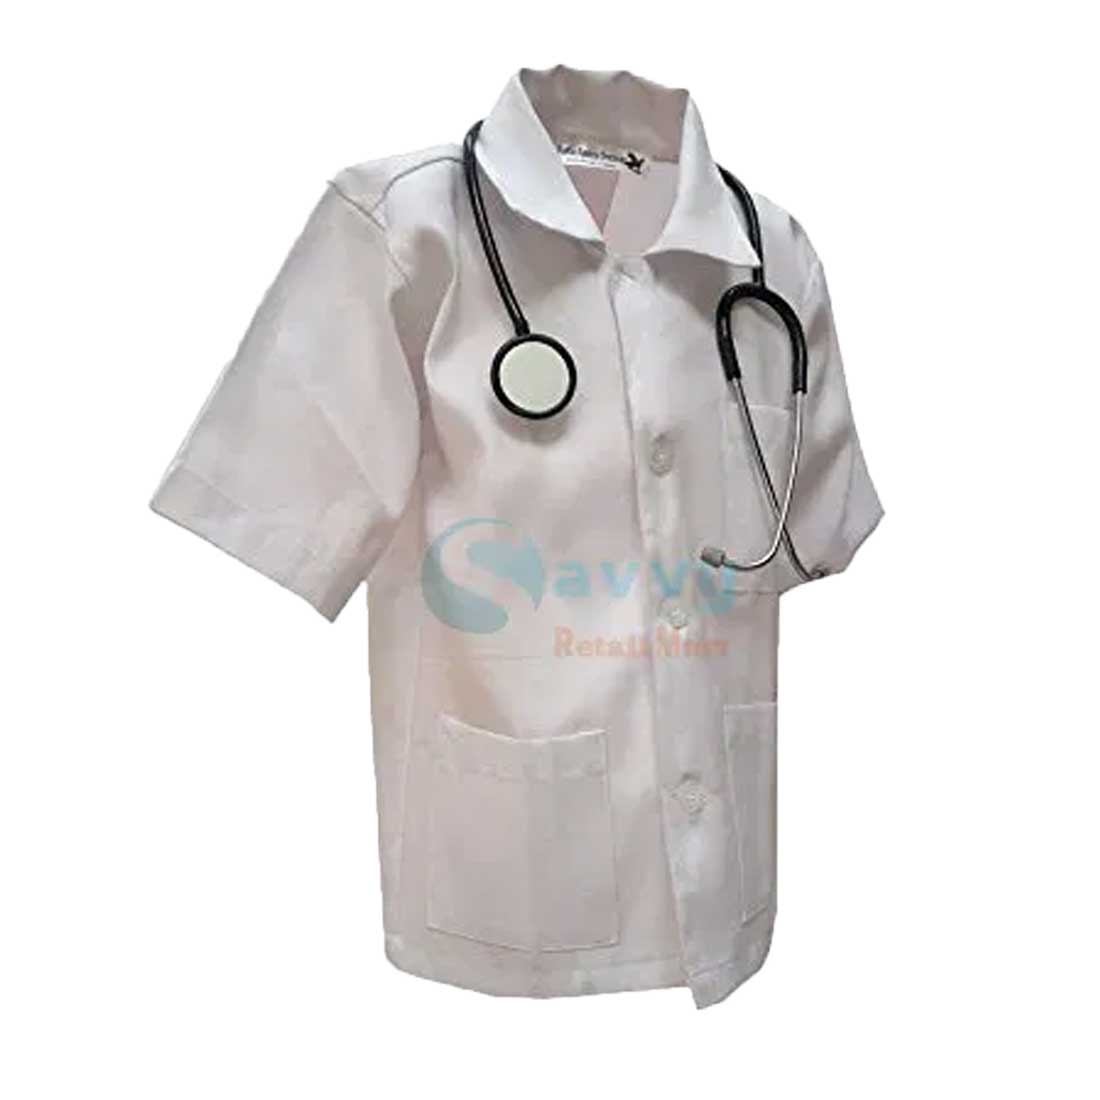 2,843 Child Doctor Dress Royalty-Free Photos and Stock Images | Shutterstock